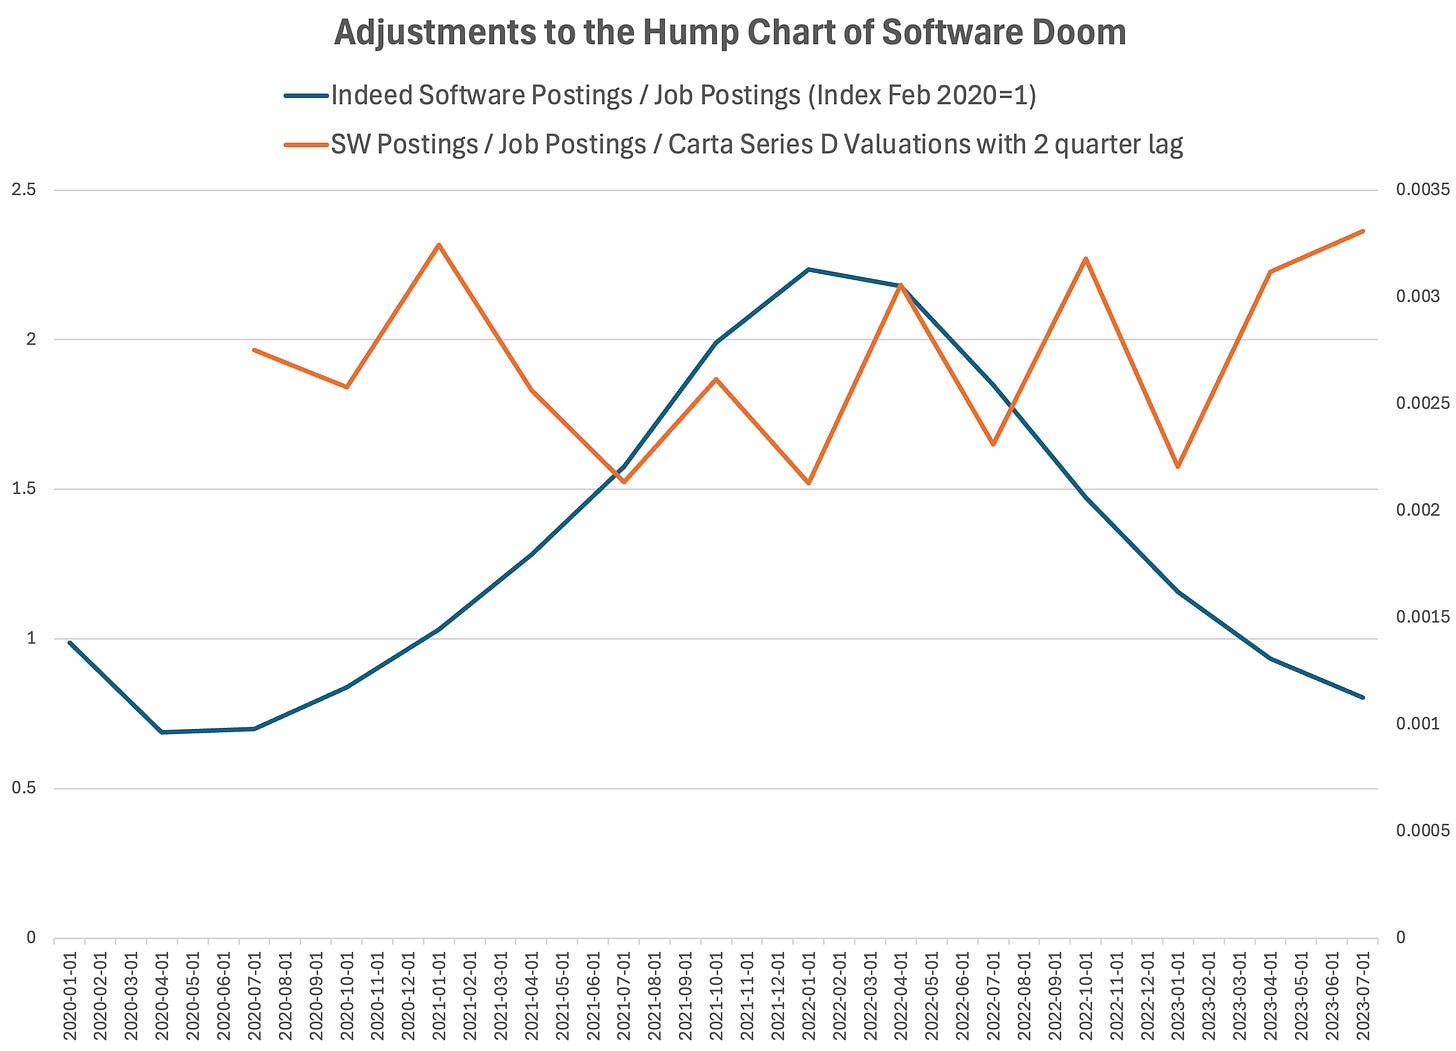 Reposting in the adjusted hump for context (blue), but when you also adjust for the Series D valuations with a lag (orange), the trend mostly disappears.